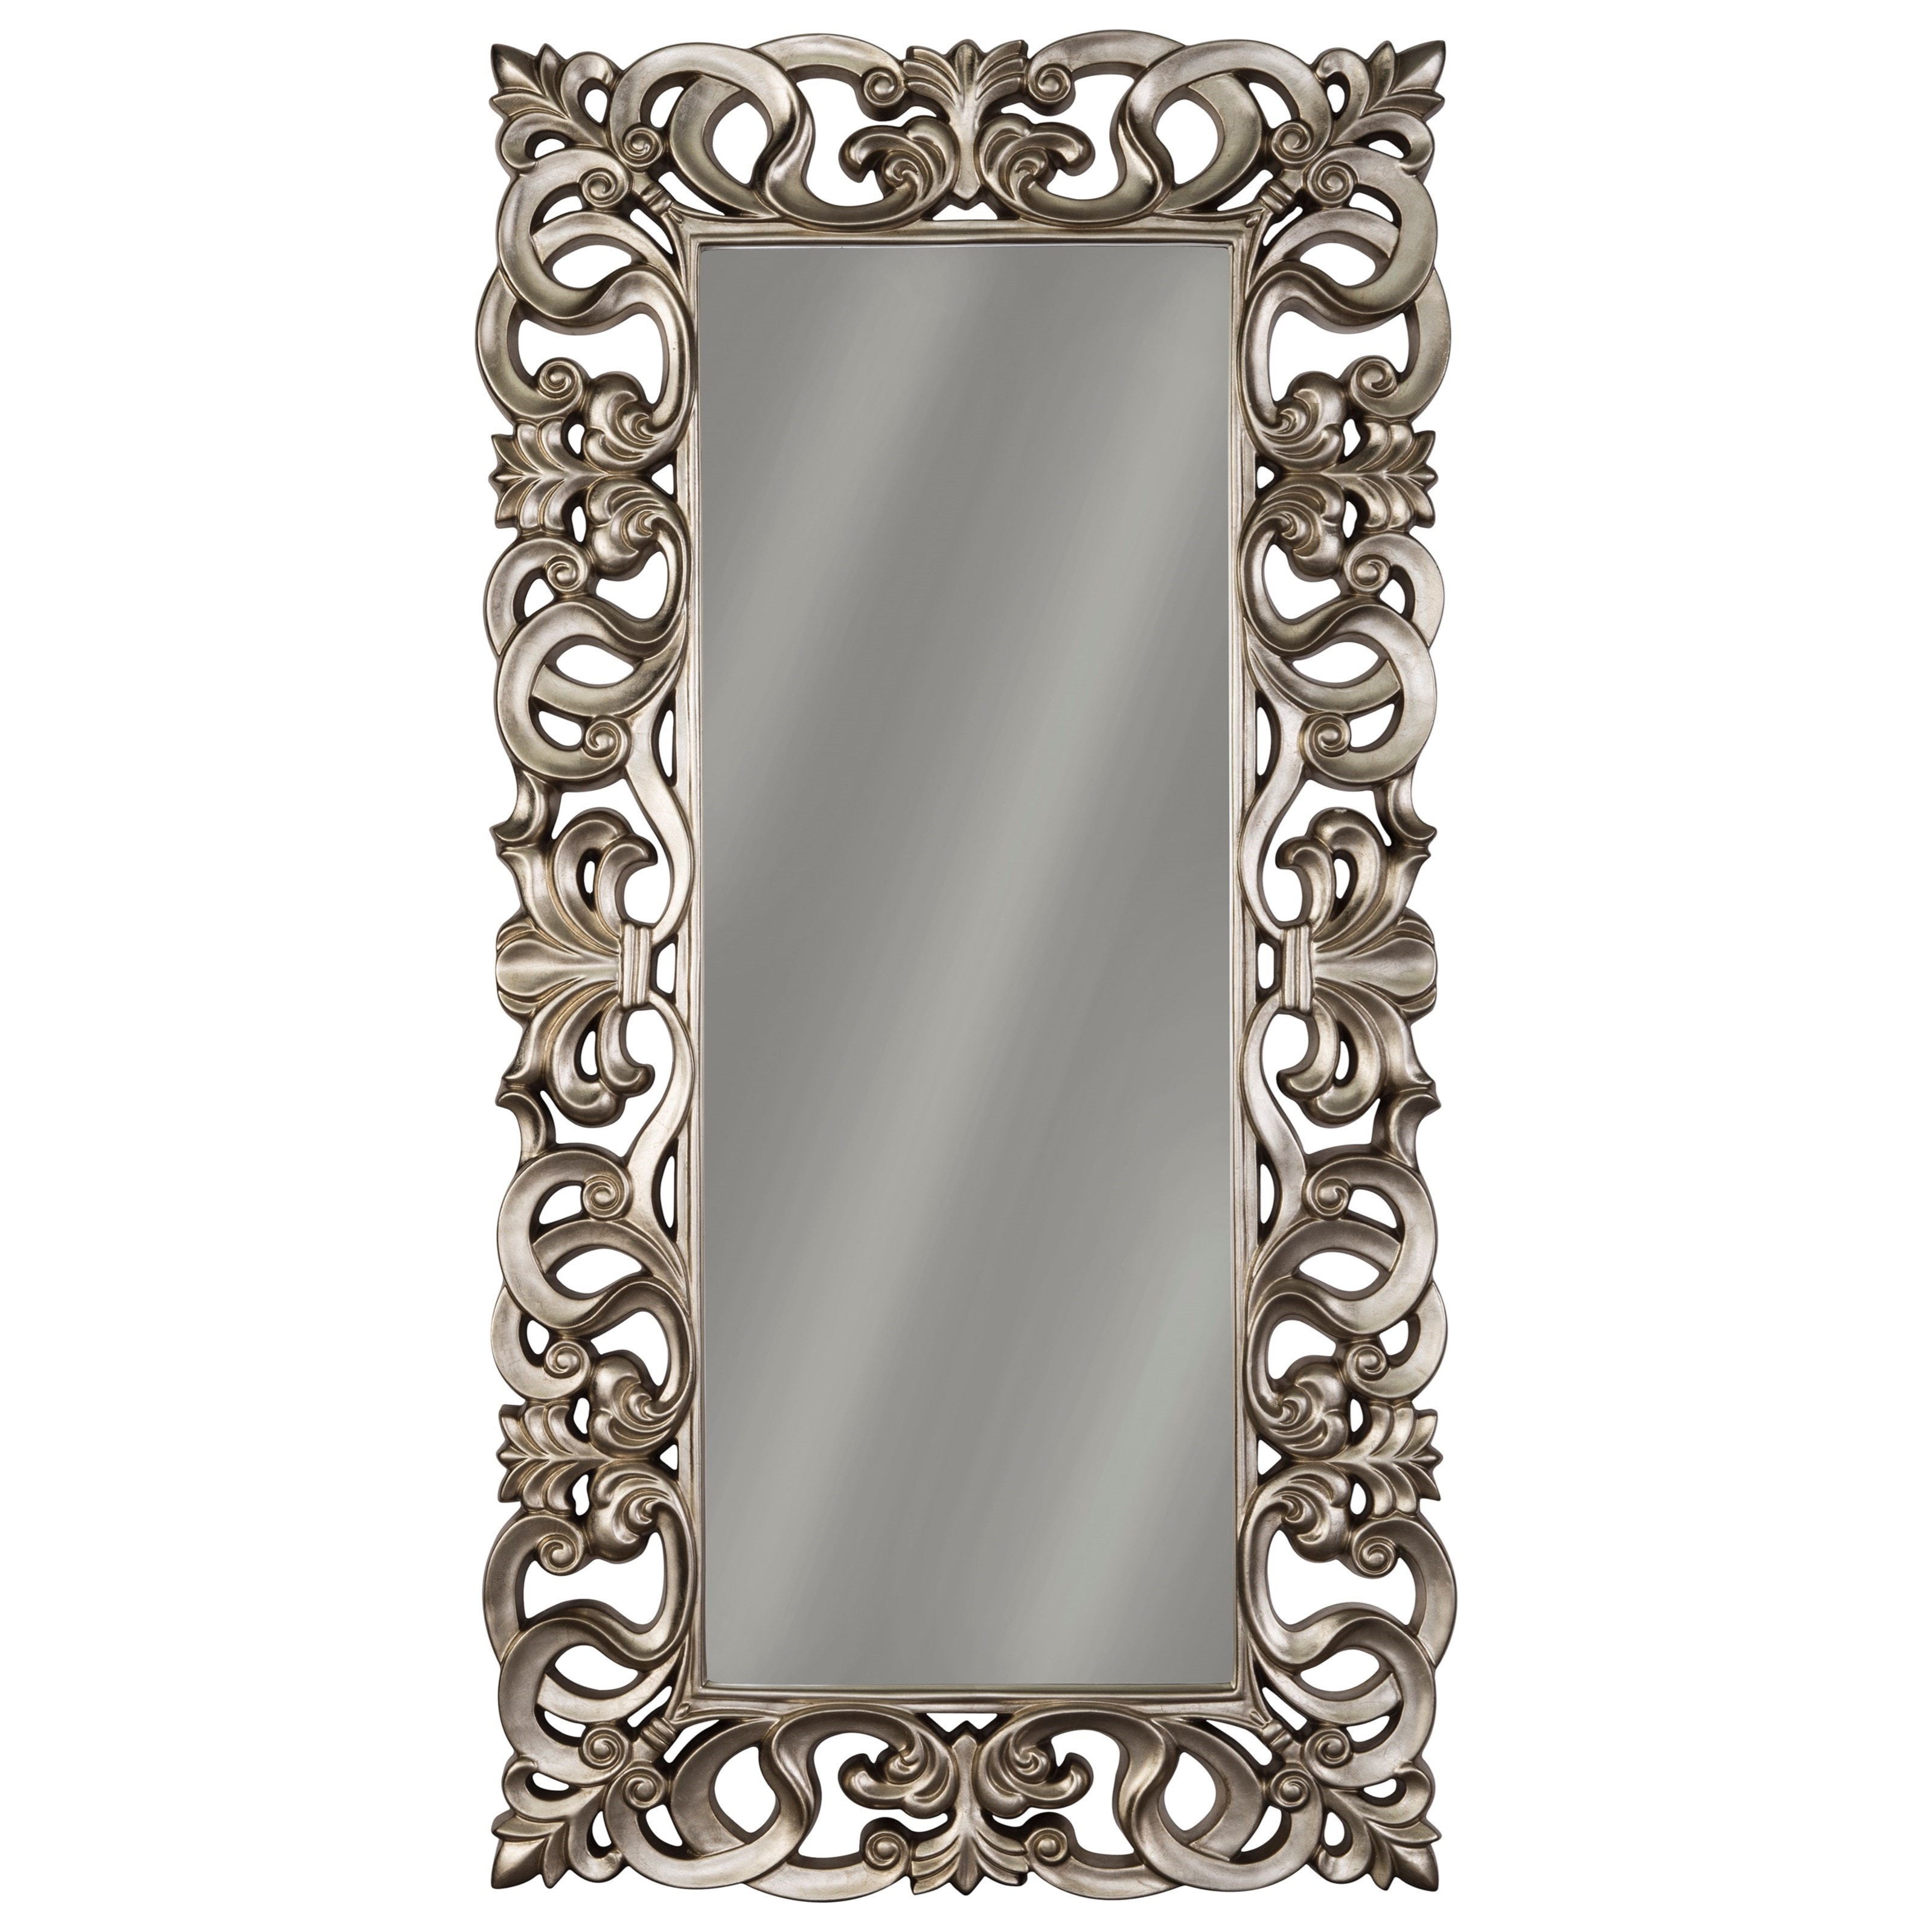 Signature Design by Ashley Accent Mirrors A8010123 Lucia Antique Silver  Finish Accent Mirror Story  Lee Furniture Floor Mirrors